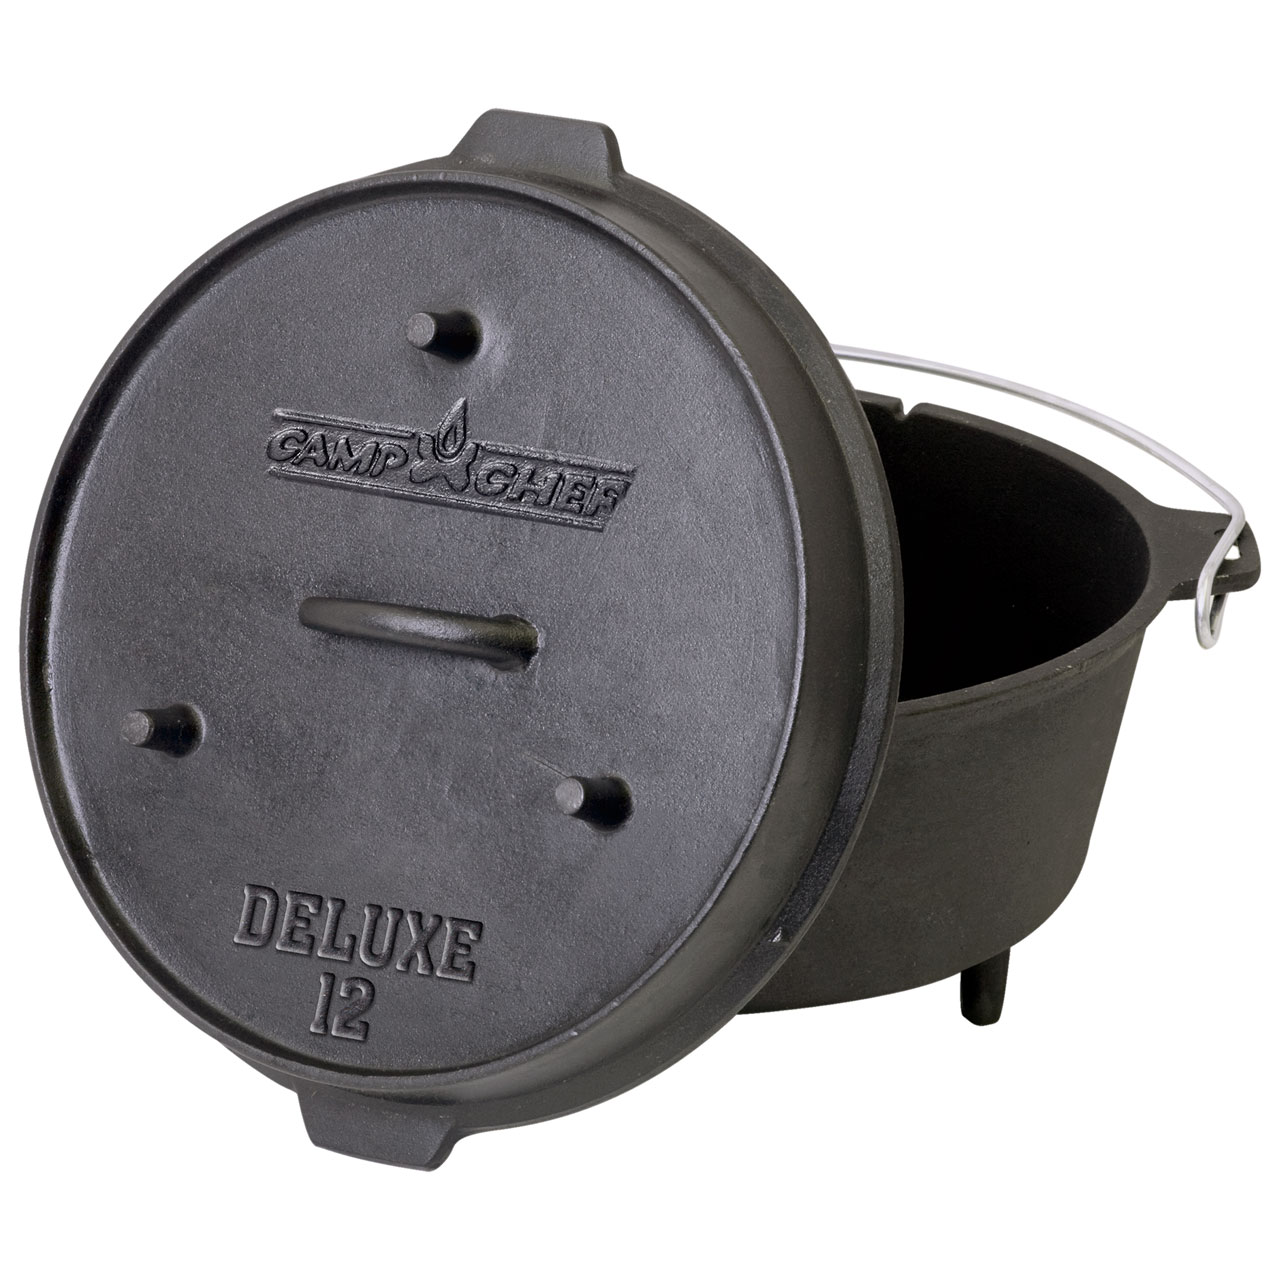 Camp Chef 12'' Deluxe Dutch Oven